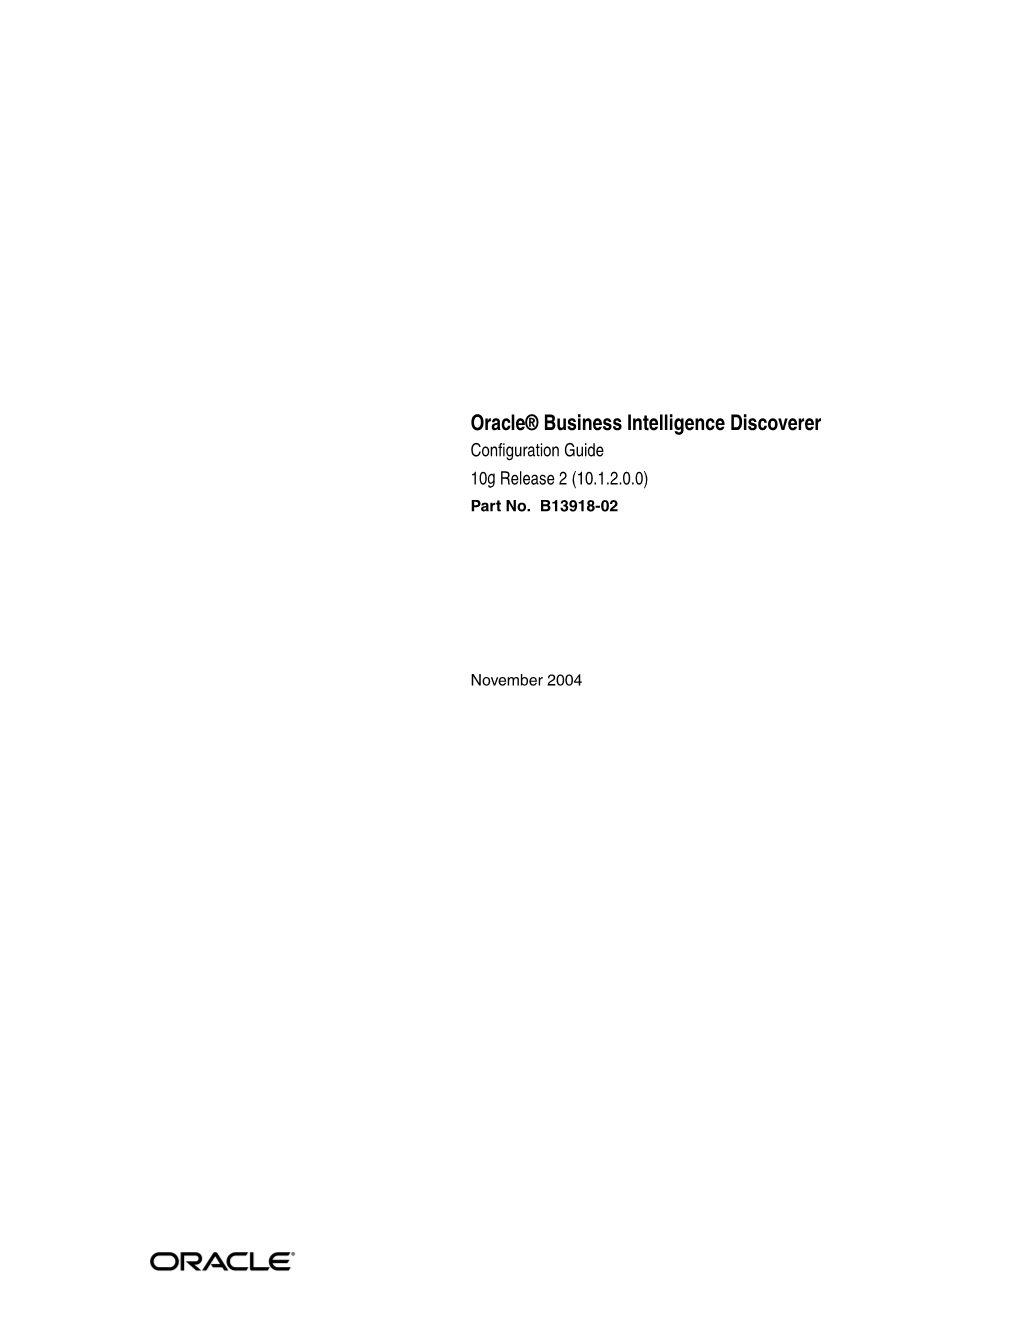 Oracle® Business Intelligence Discoverer Configuration Guide 10G Release 2 (10.1.2.0.0) Part No